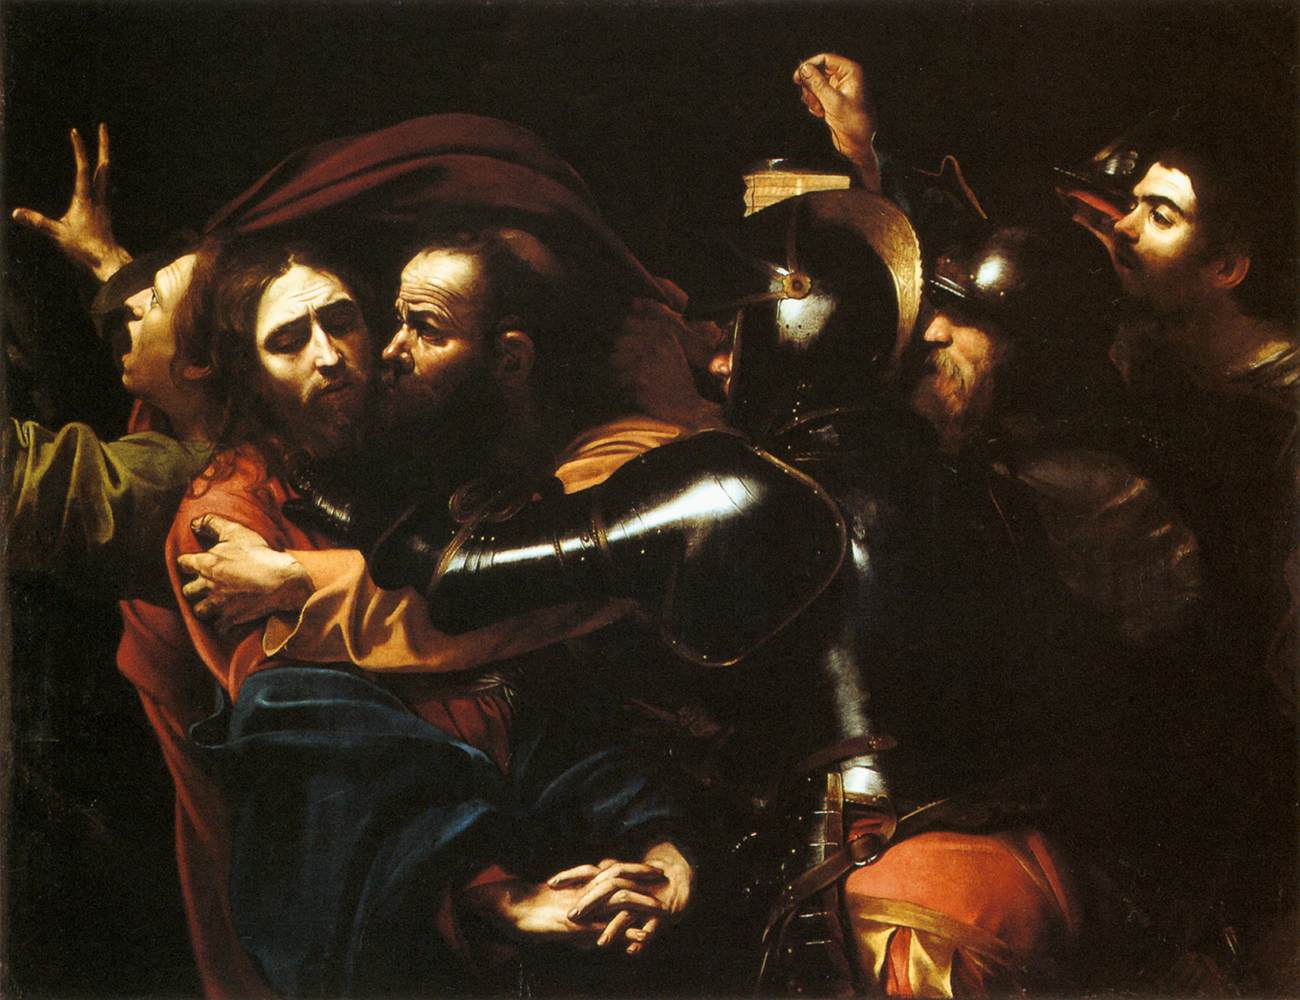 Taking of the Christ by Caravaggio